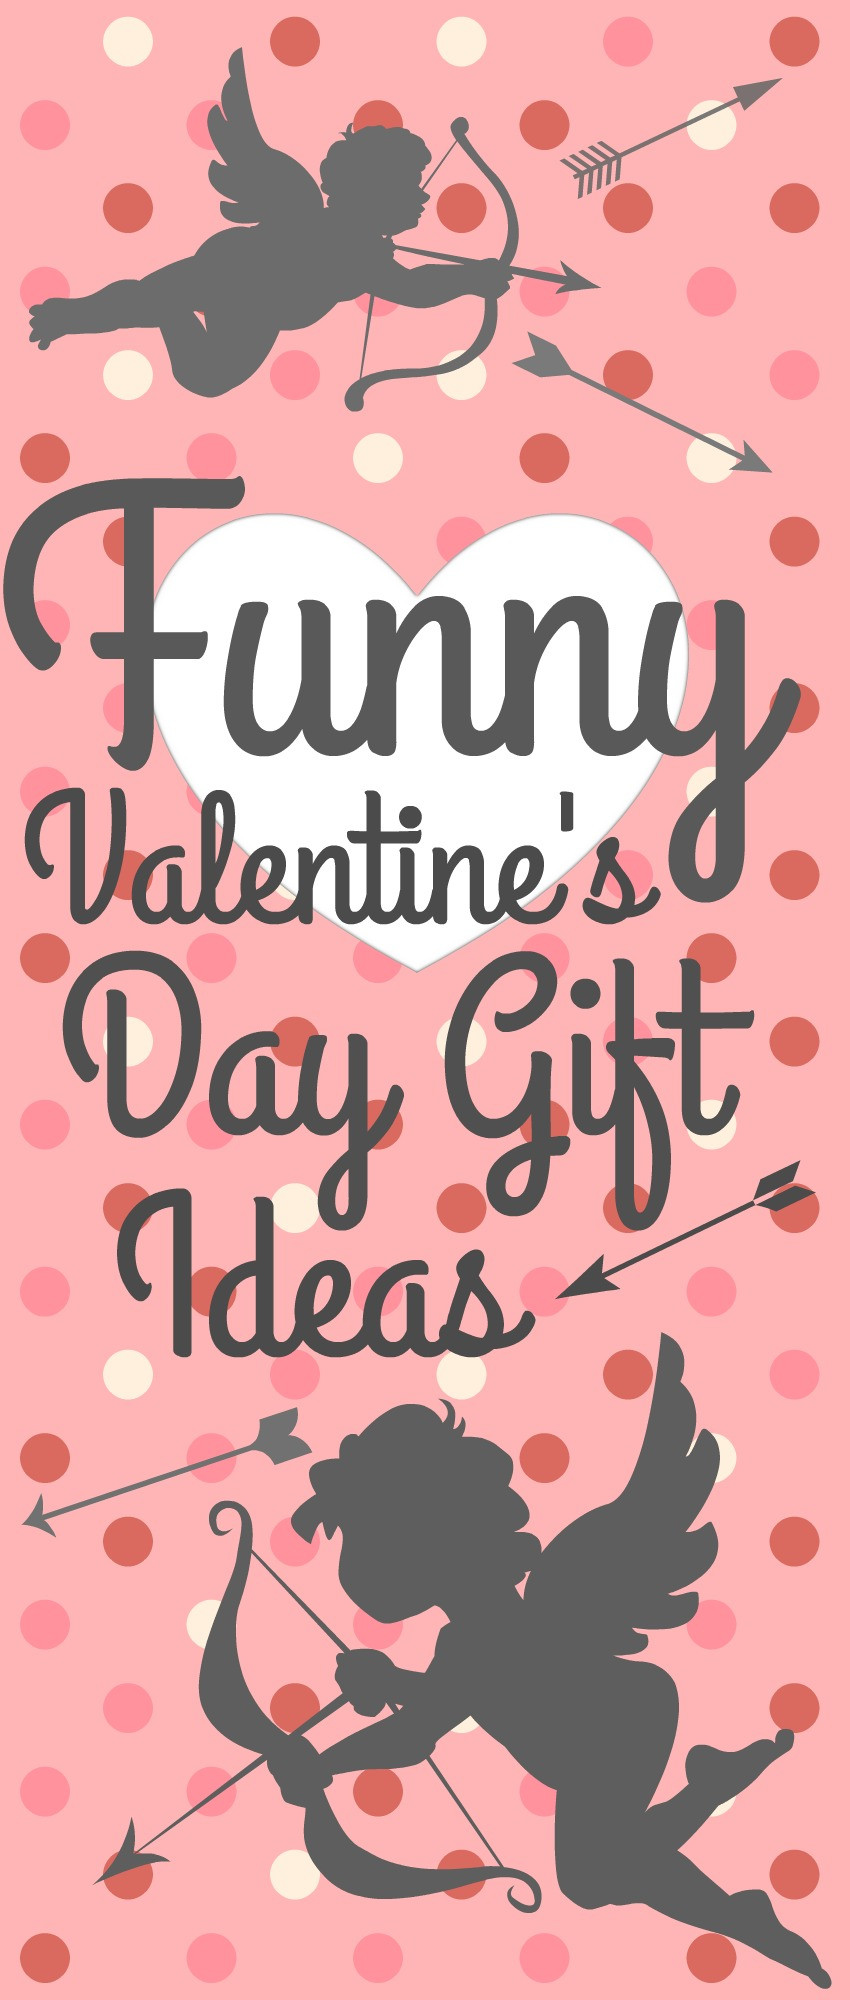 Funny Valentines Day Gifts
 Funny Valentine s Day Gifts